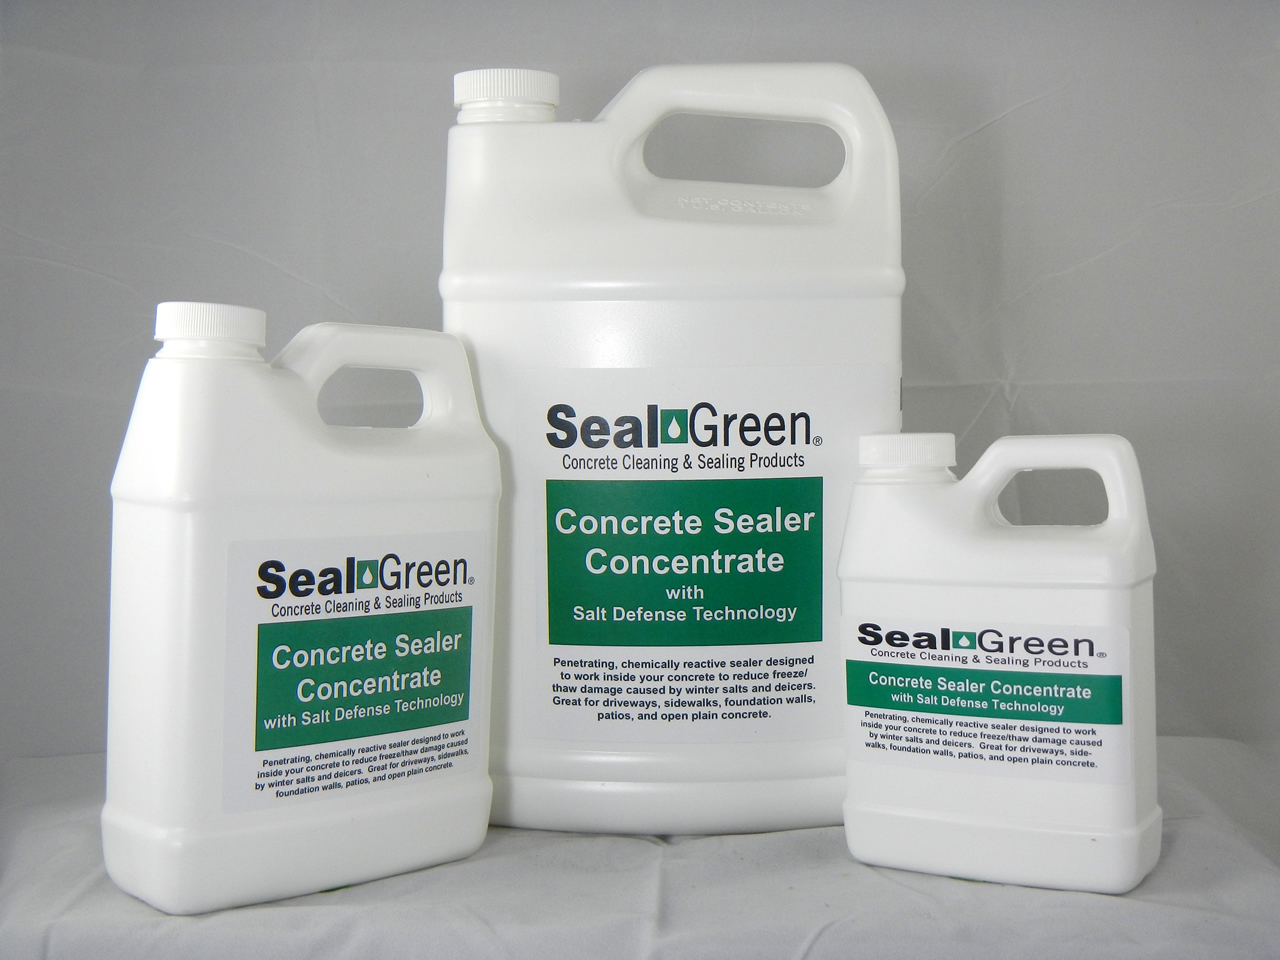 HI,   I've been using your Ice Melt for a long time. I am thinking about trying your Concrete Sealer this year. Oth